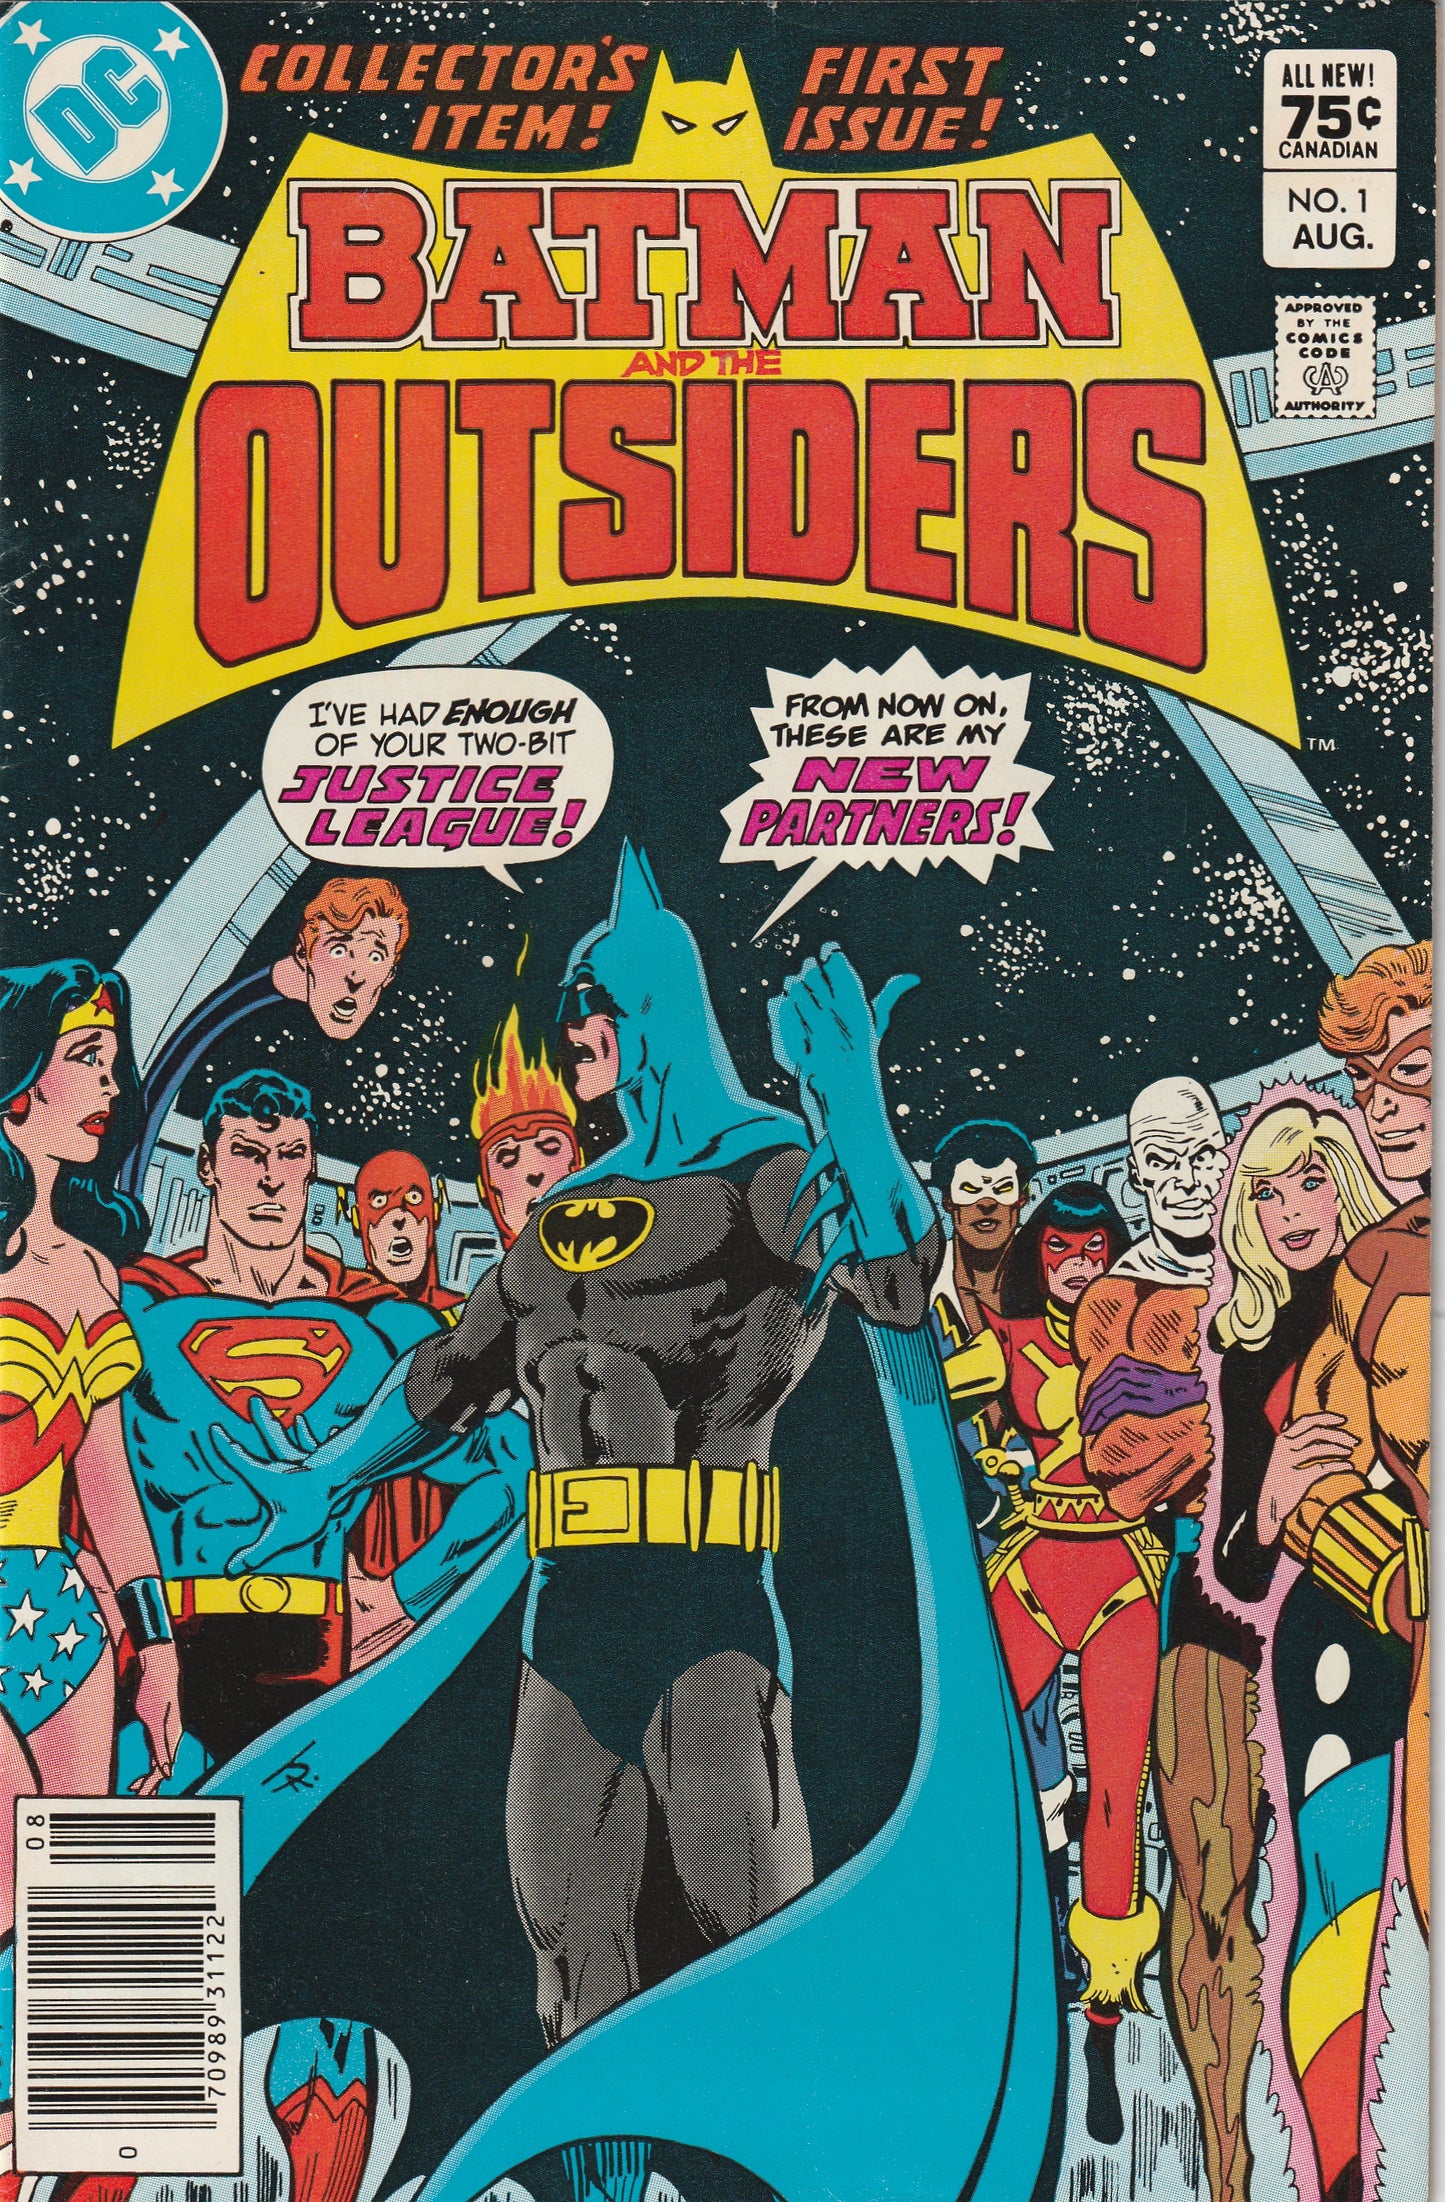 Batman And The Outsiders #1 (1983) - Canadian Price Variant